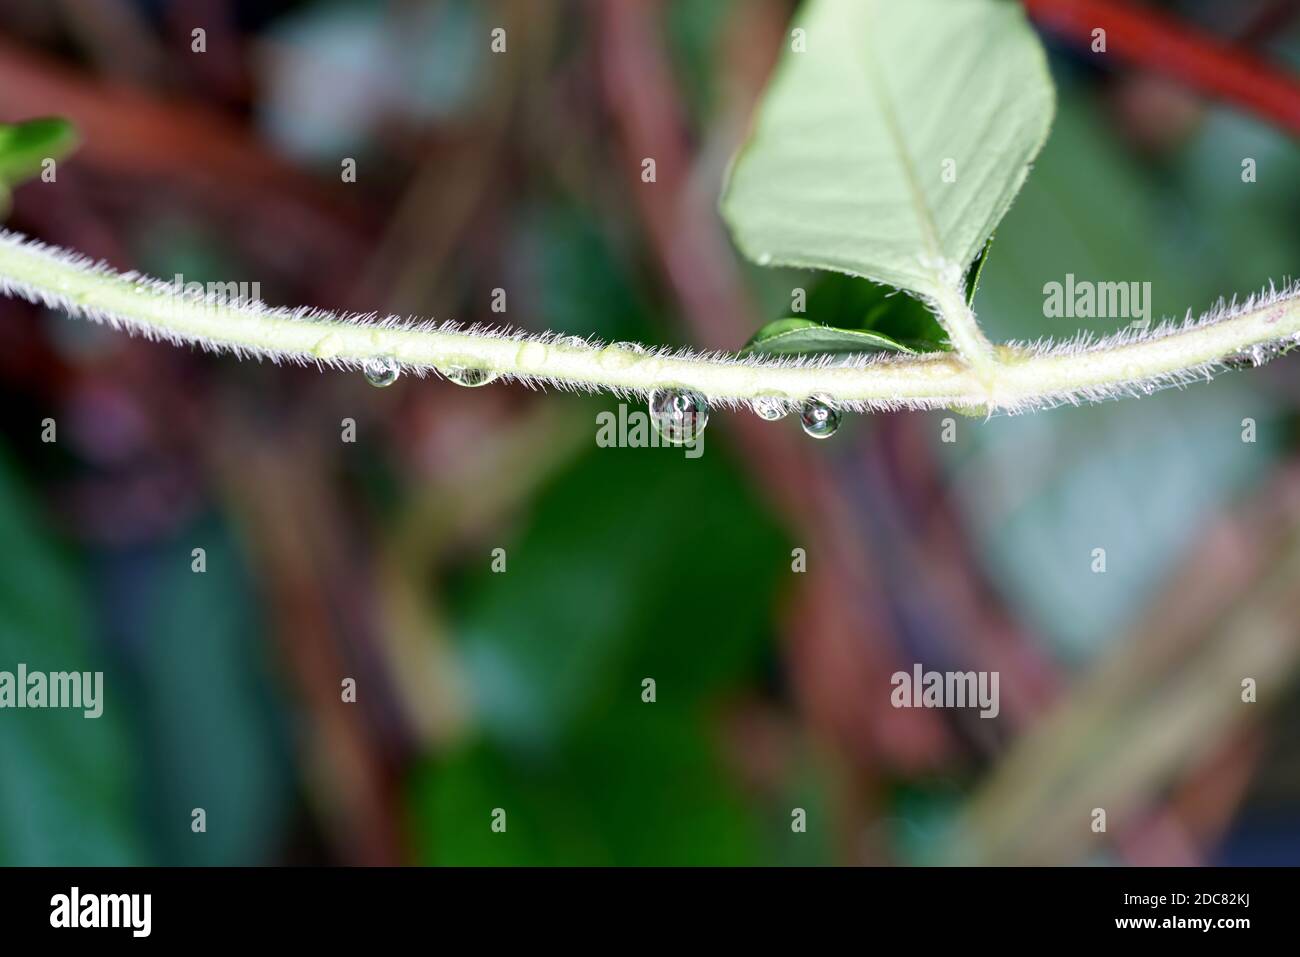 A closeup of water drops from the rain on a branch of a plant on a blurry background Stock Photo